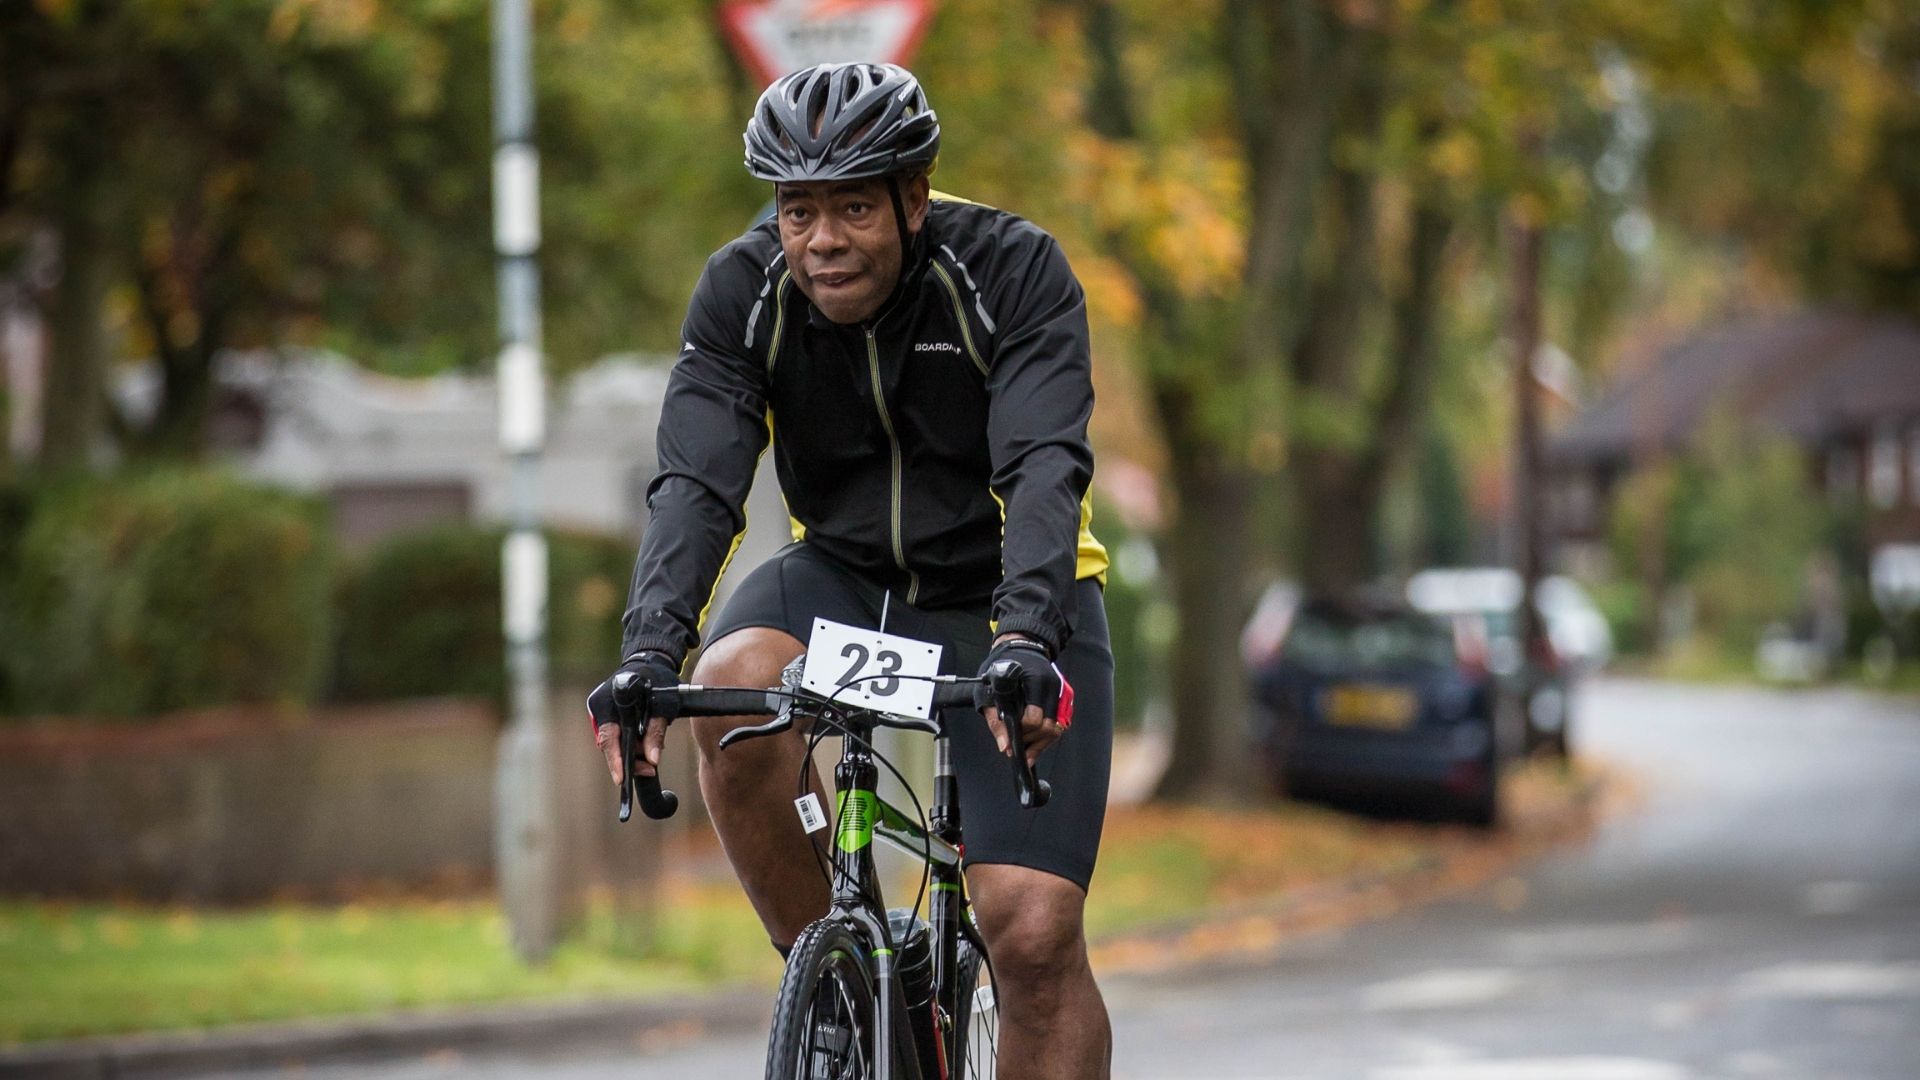 Black male cyclist participating in the St James Place triathlon